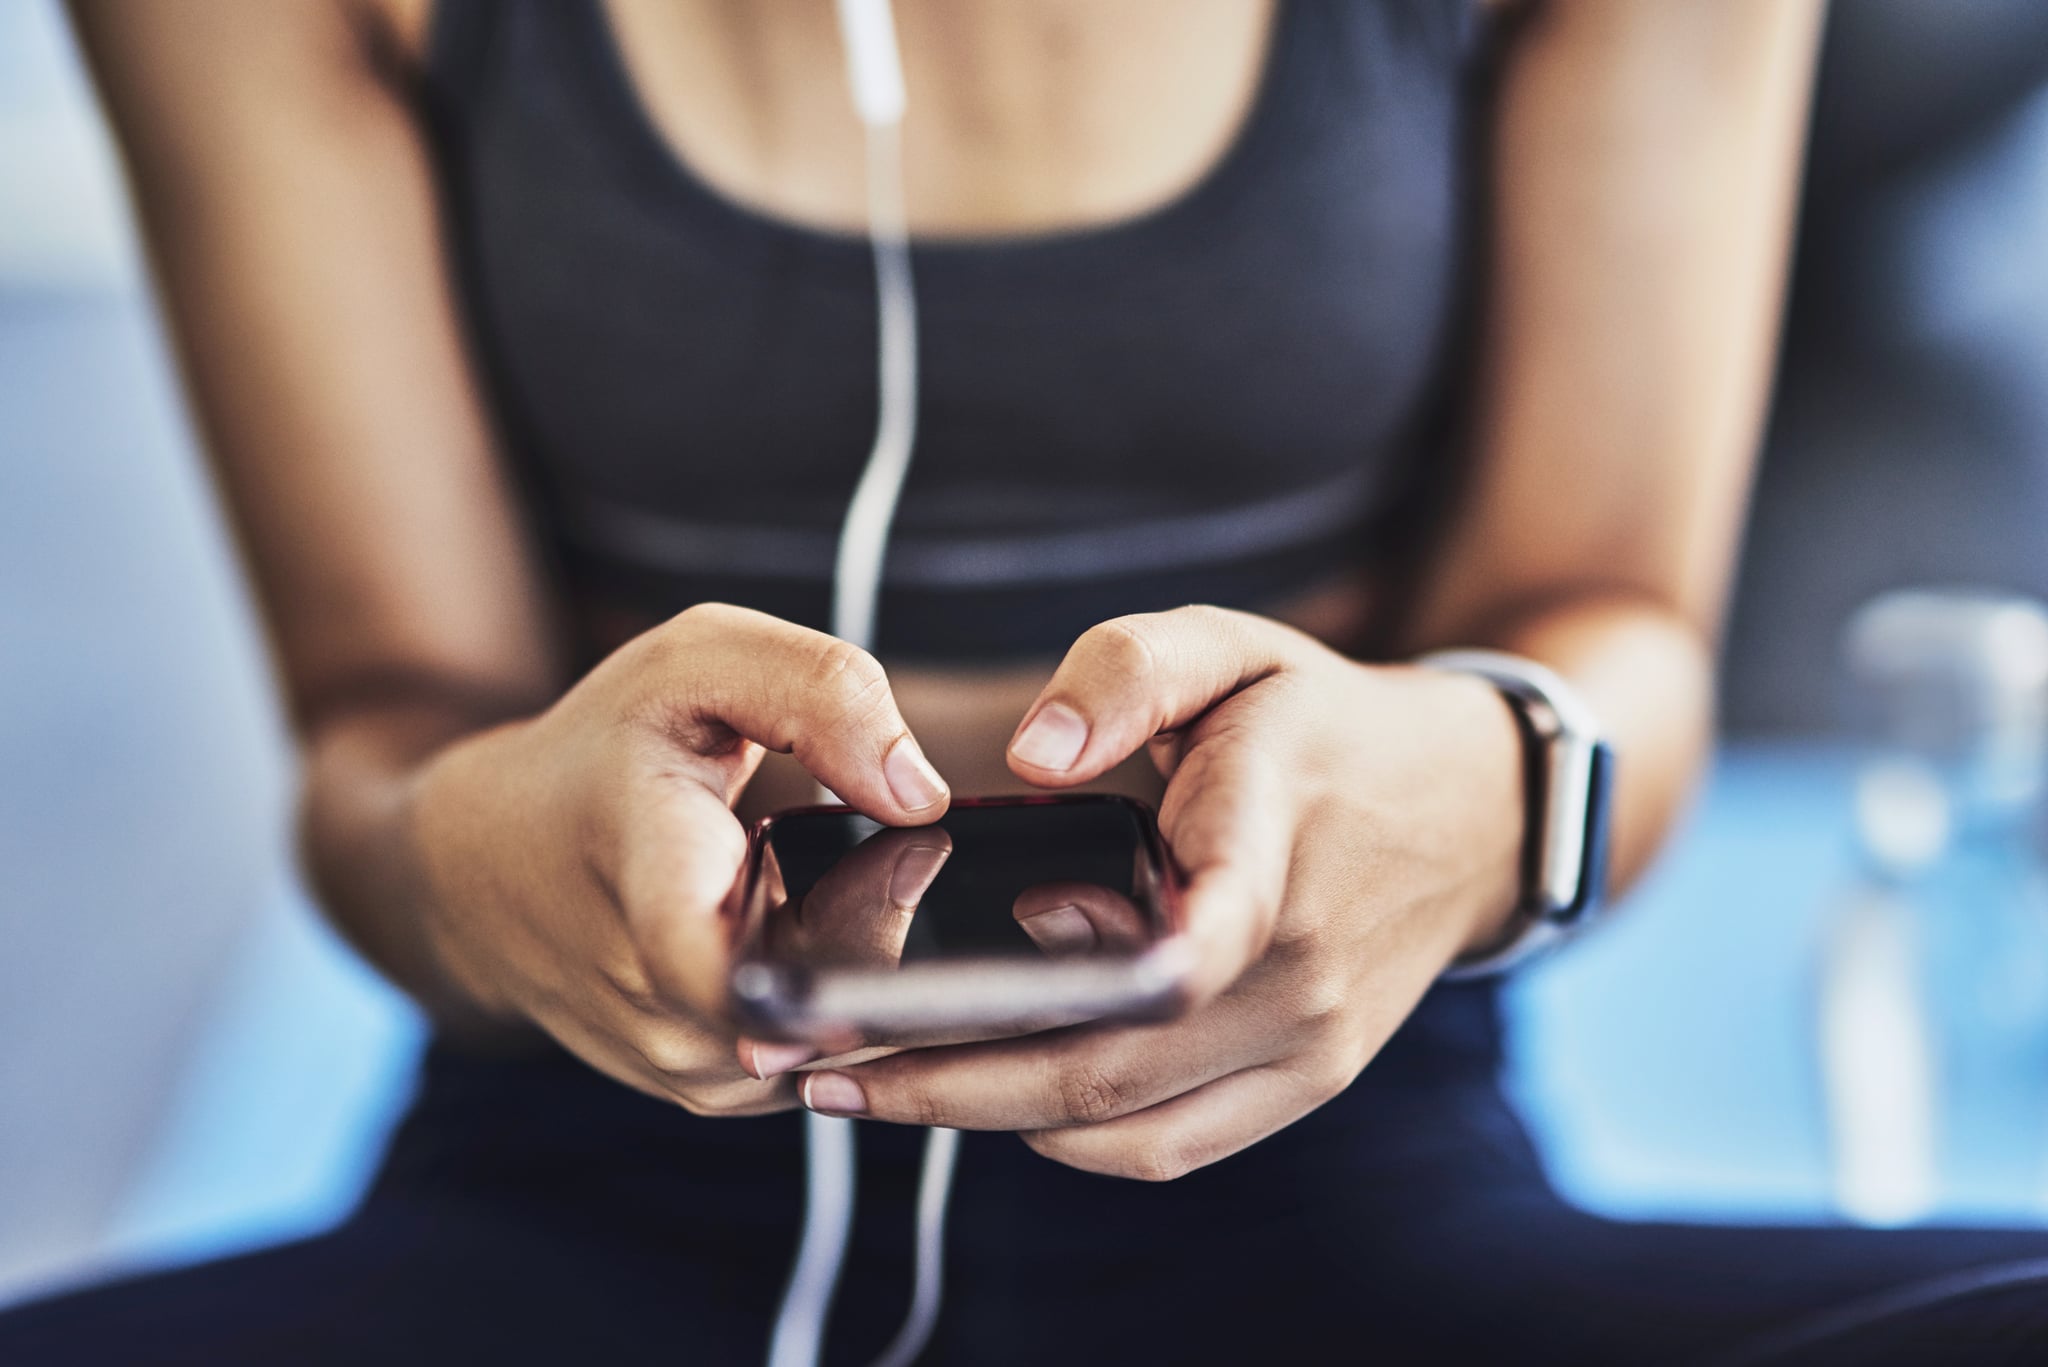 Closeup shot of a sporty woman using a cellphone while exercising in a studio